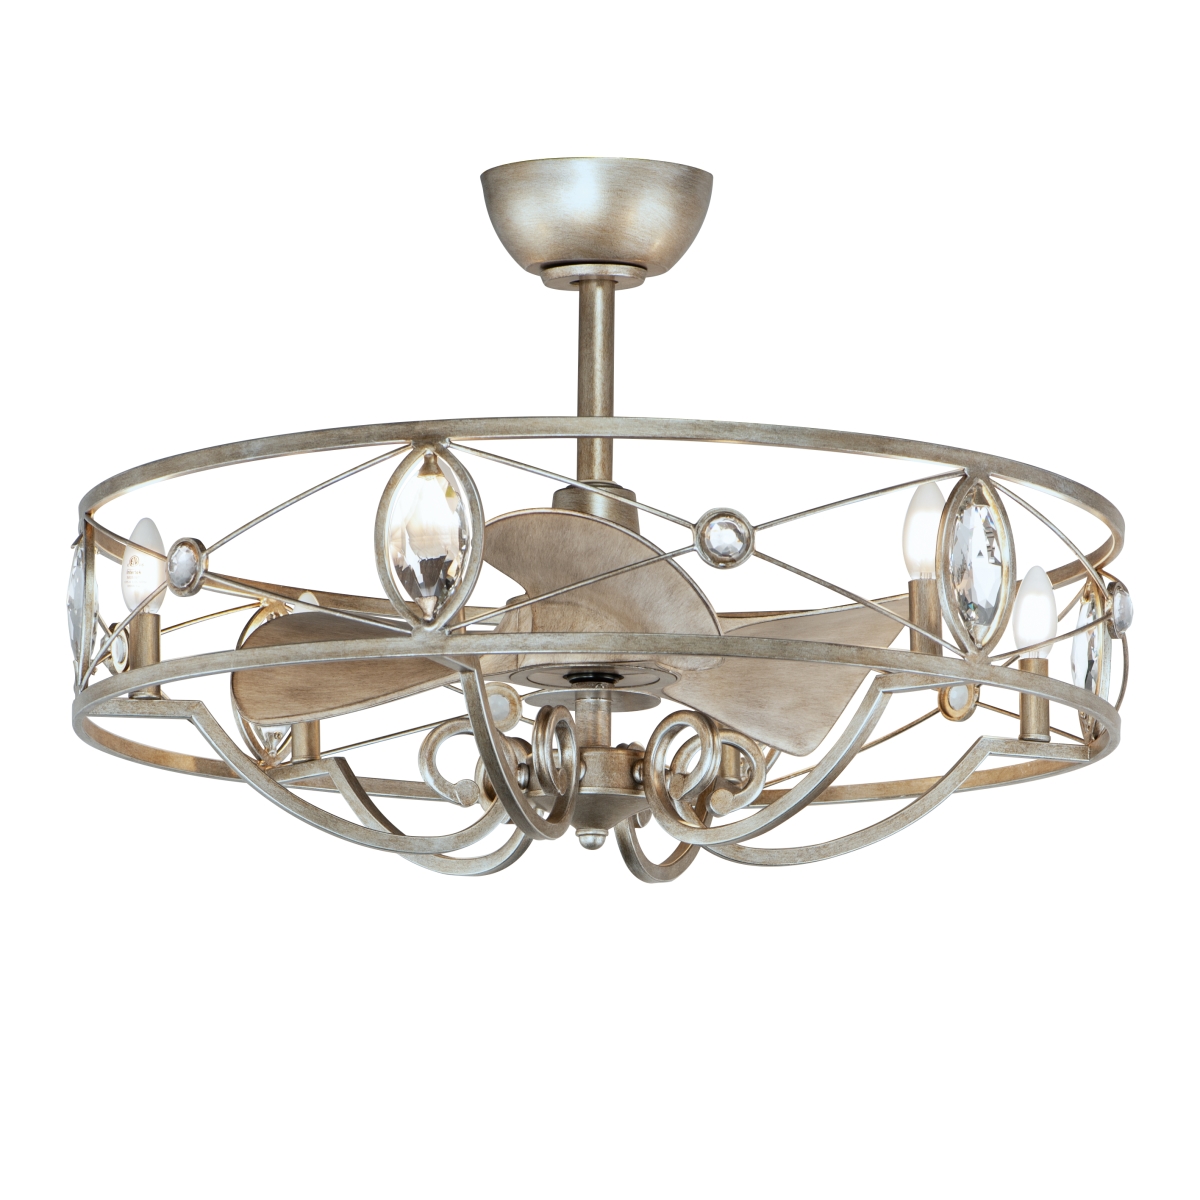 Picture of Maxim Lighting 61013SM Solitaire 6-Light WiFi-Enabled LED Fandelight, Silver Mist